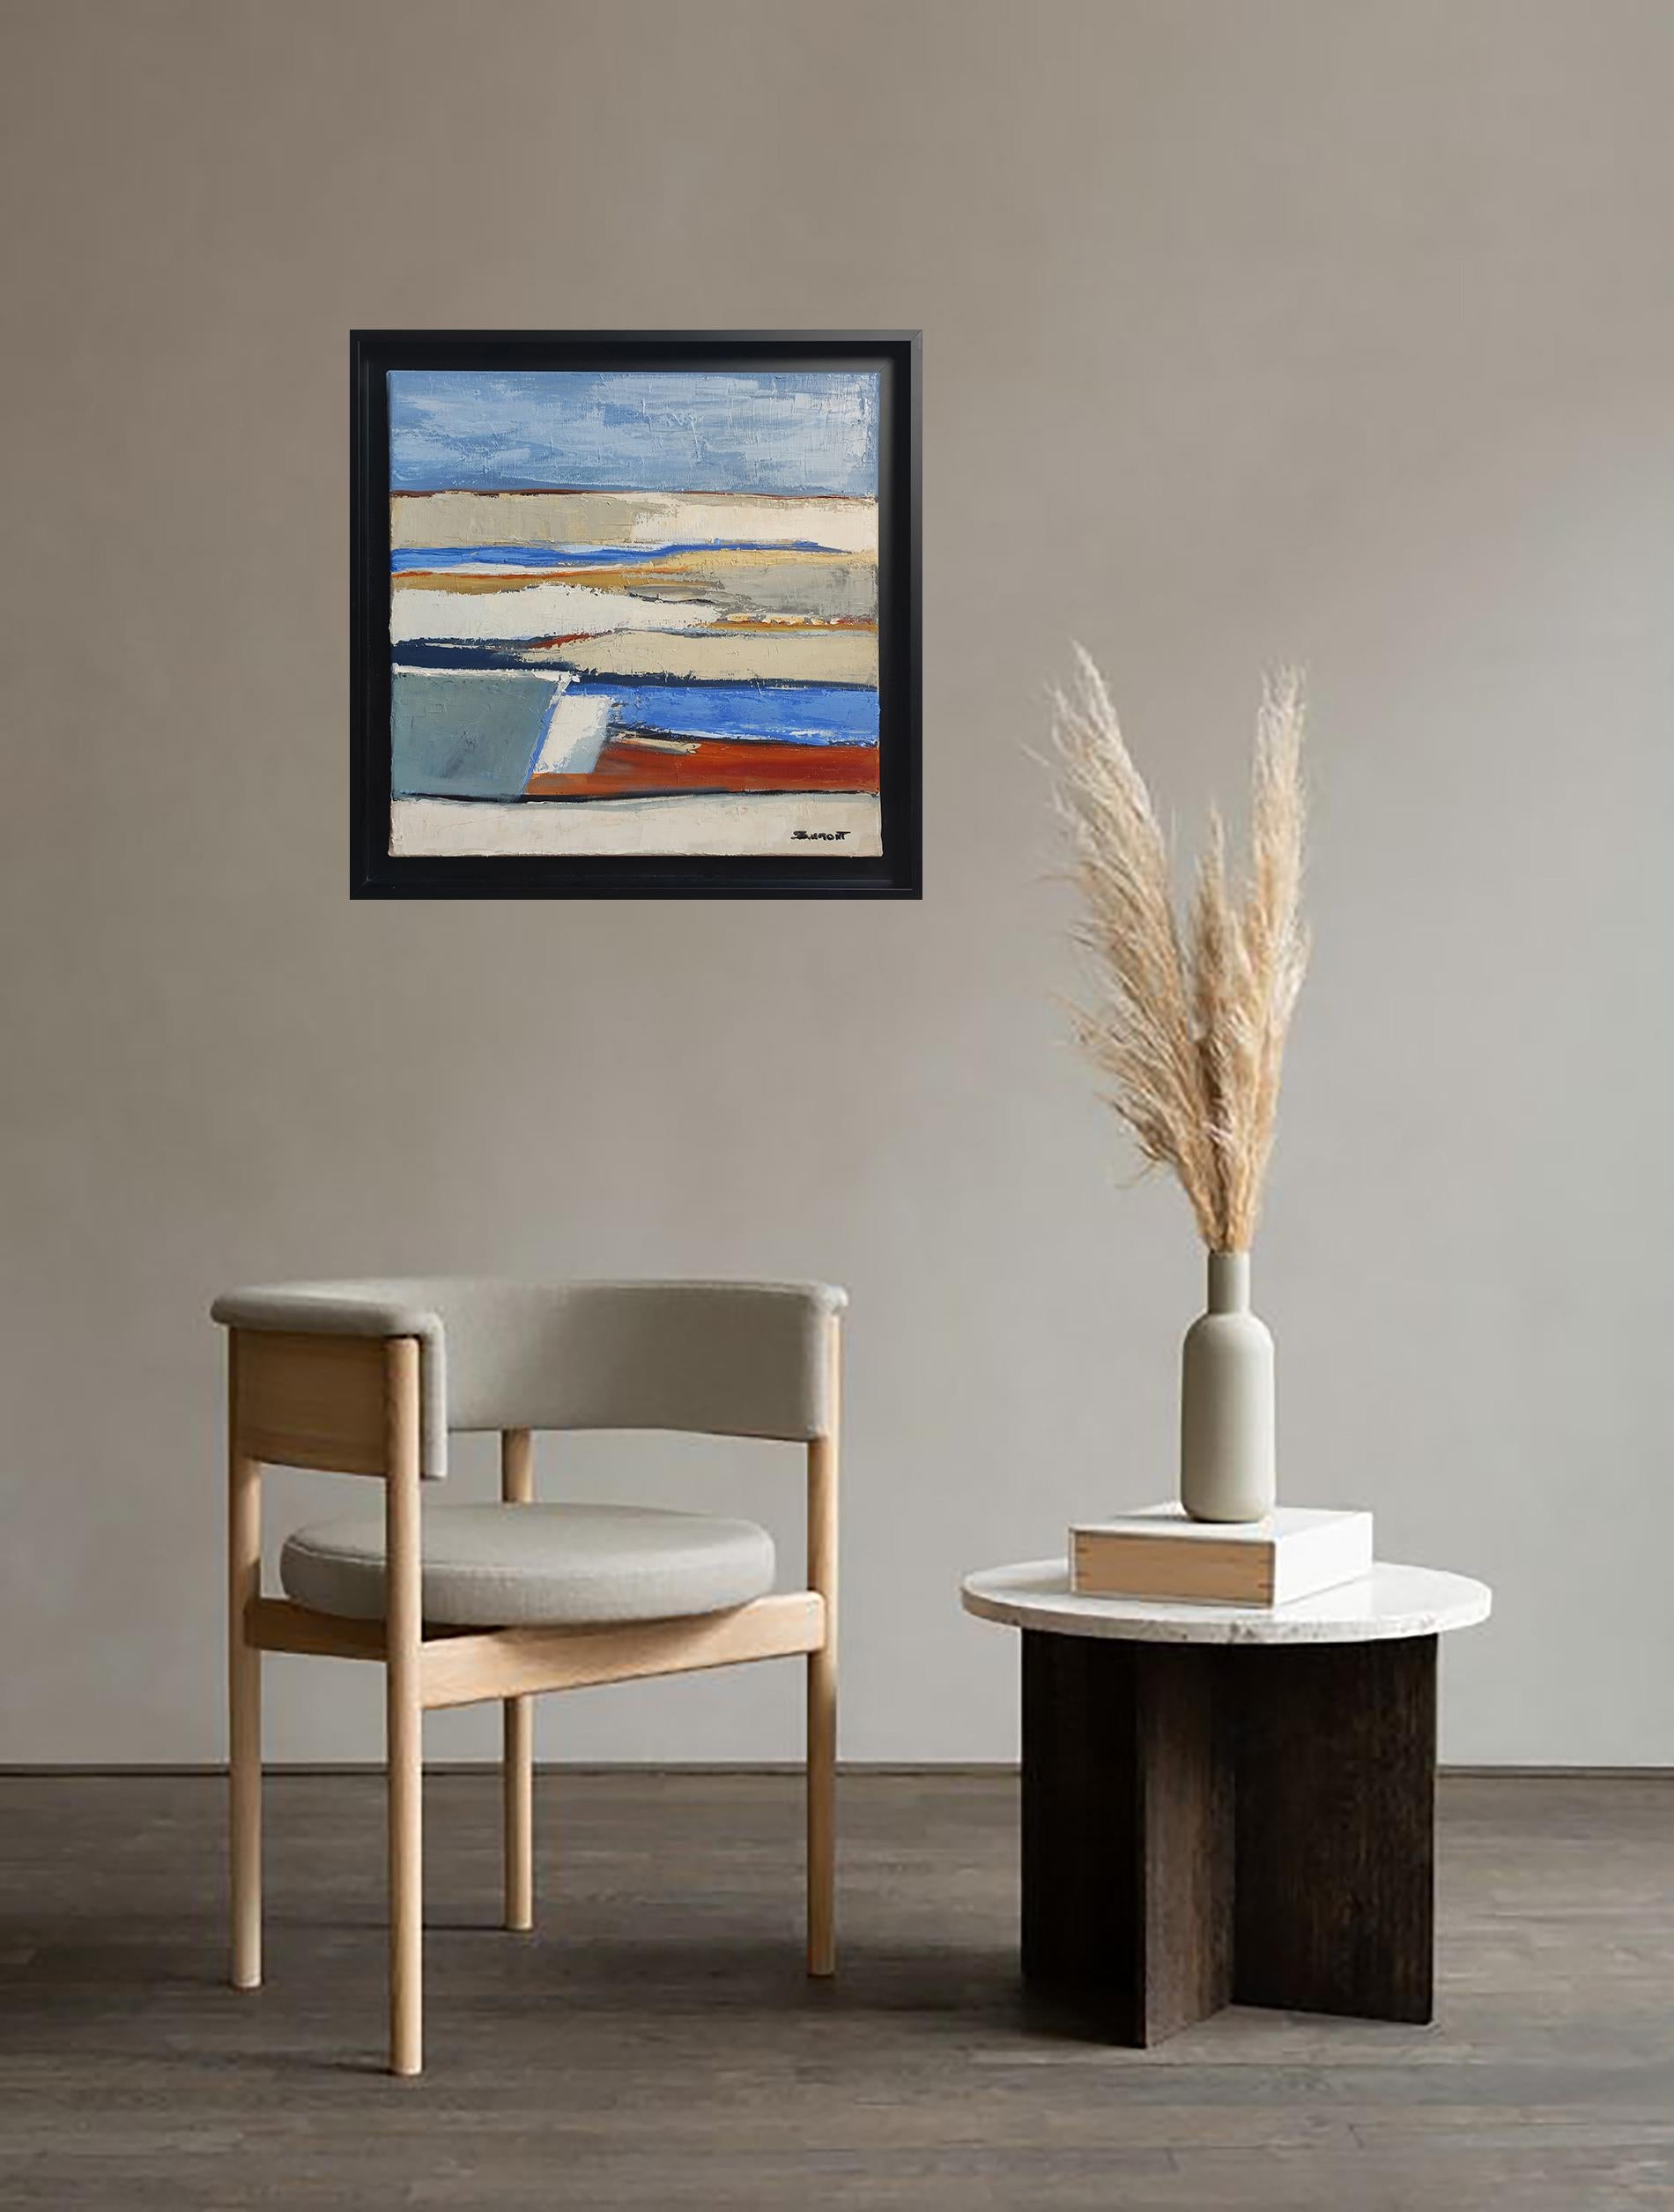  Created by contemporary artist Sophie Dumont, this oil on linen canvas piece offers immersion into a world where nature and architecture blend harmoniously.

Measuring a modest 40 x 40 cm (15.74 x 15.74 in)  framed in elegant dimensions of 47 x 47